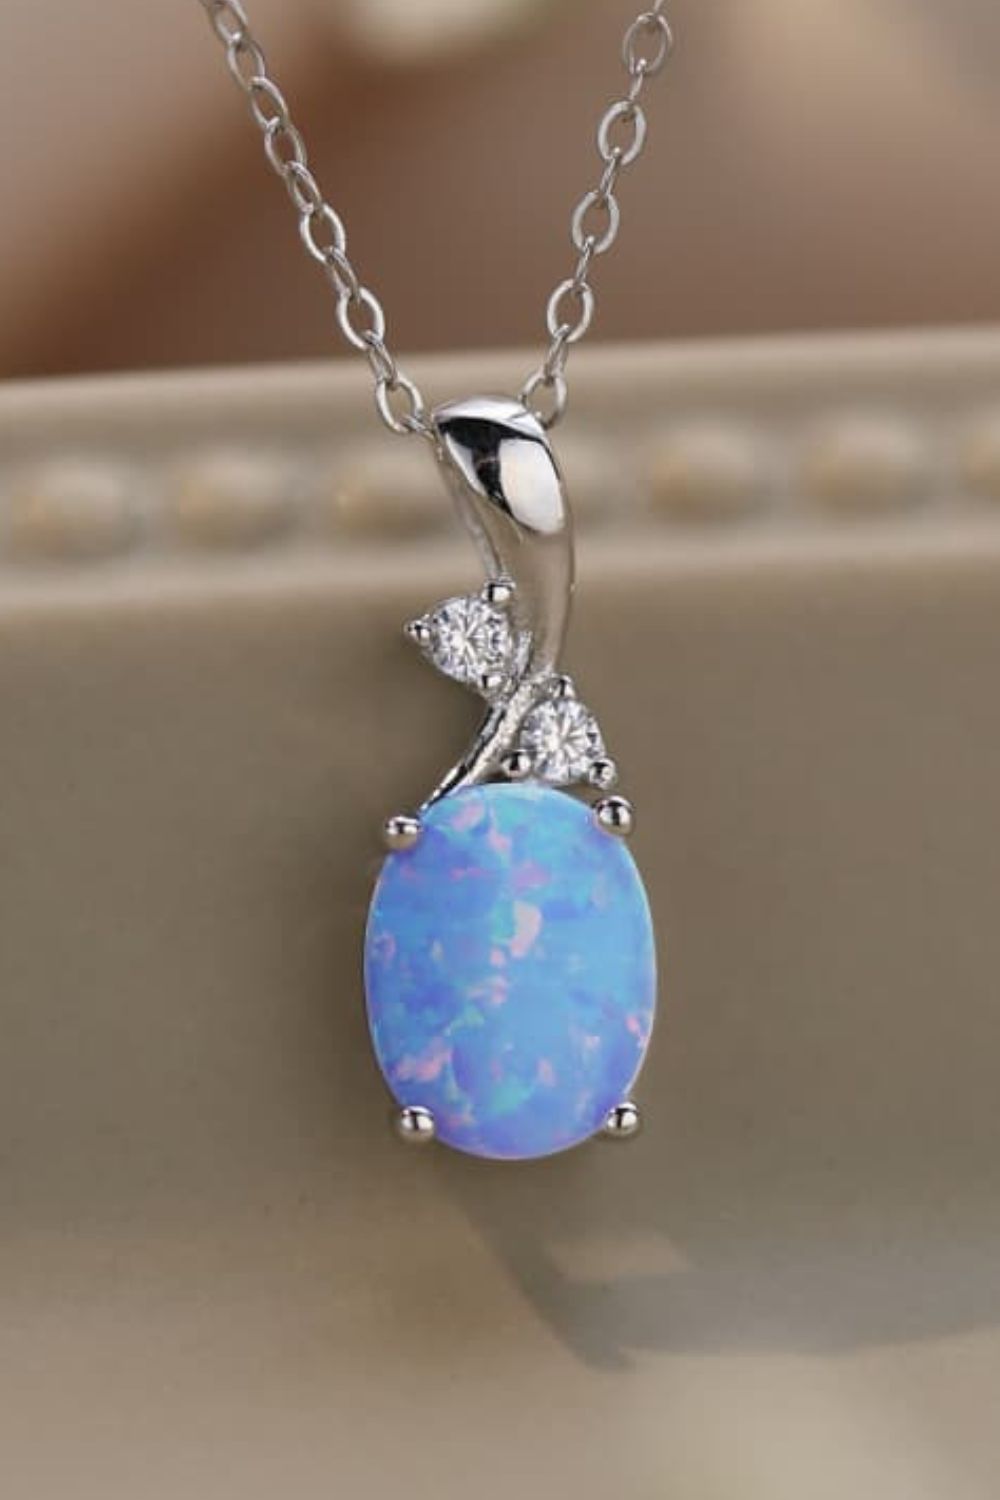 Dim Gray Opal Oval Pendant Chain Necklace Sentient Beauty Fashions jewelry